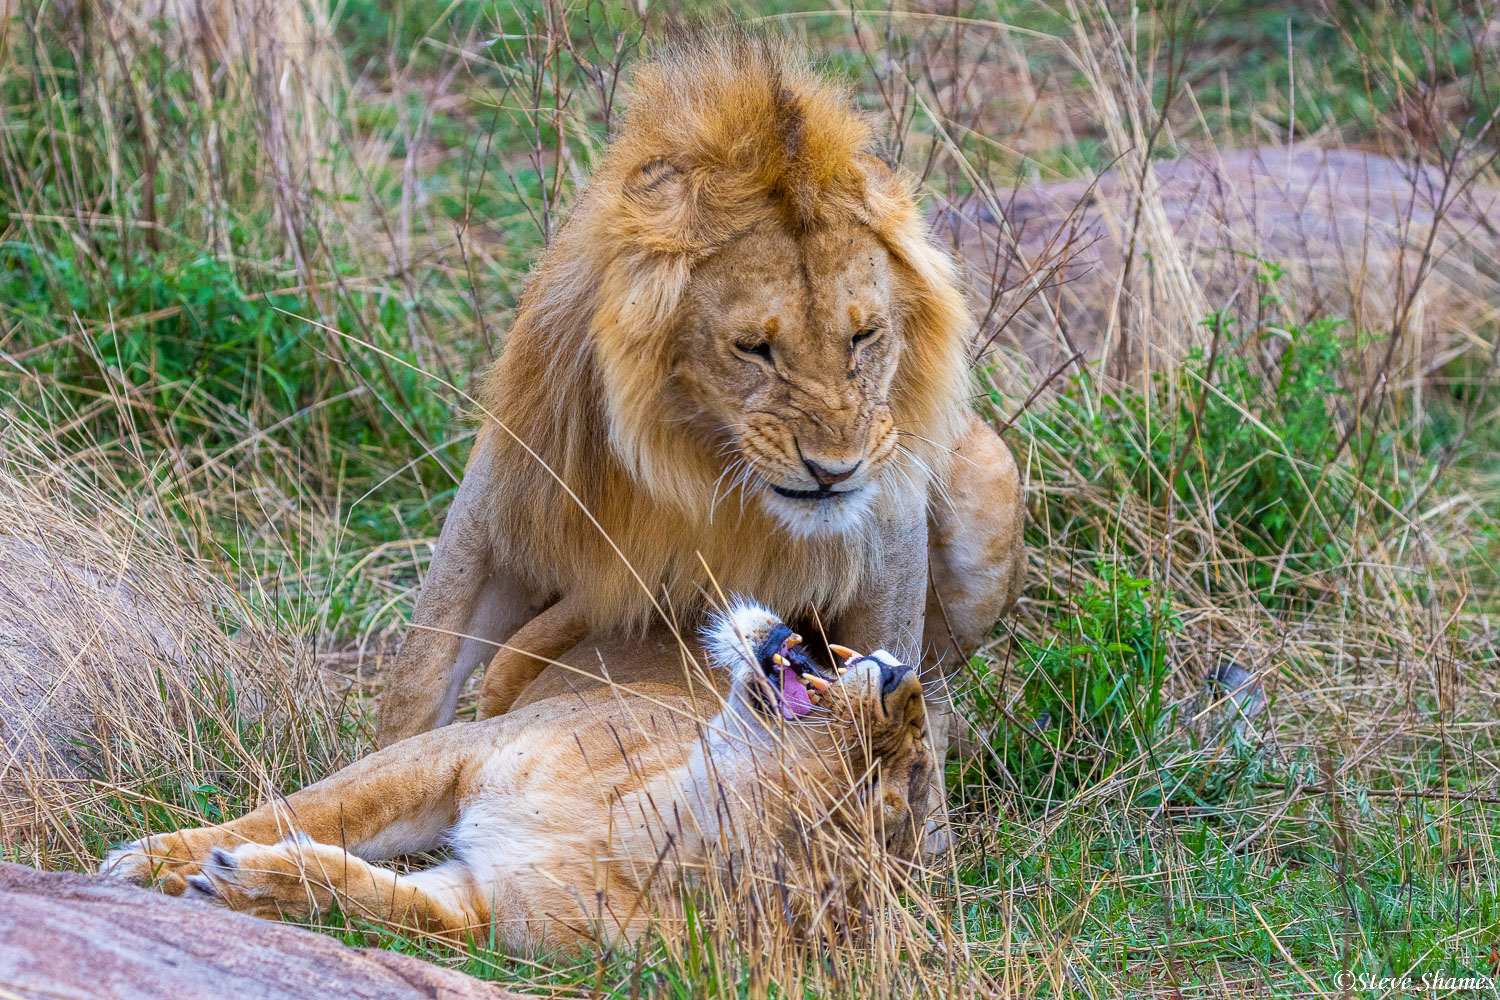 What looks like a bickering lion couple, is just the normal mating procedure for lions. They will be back at it in 20 minutes...